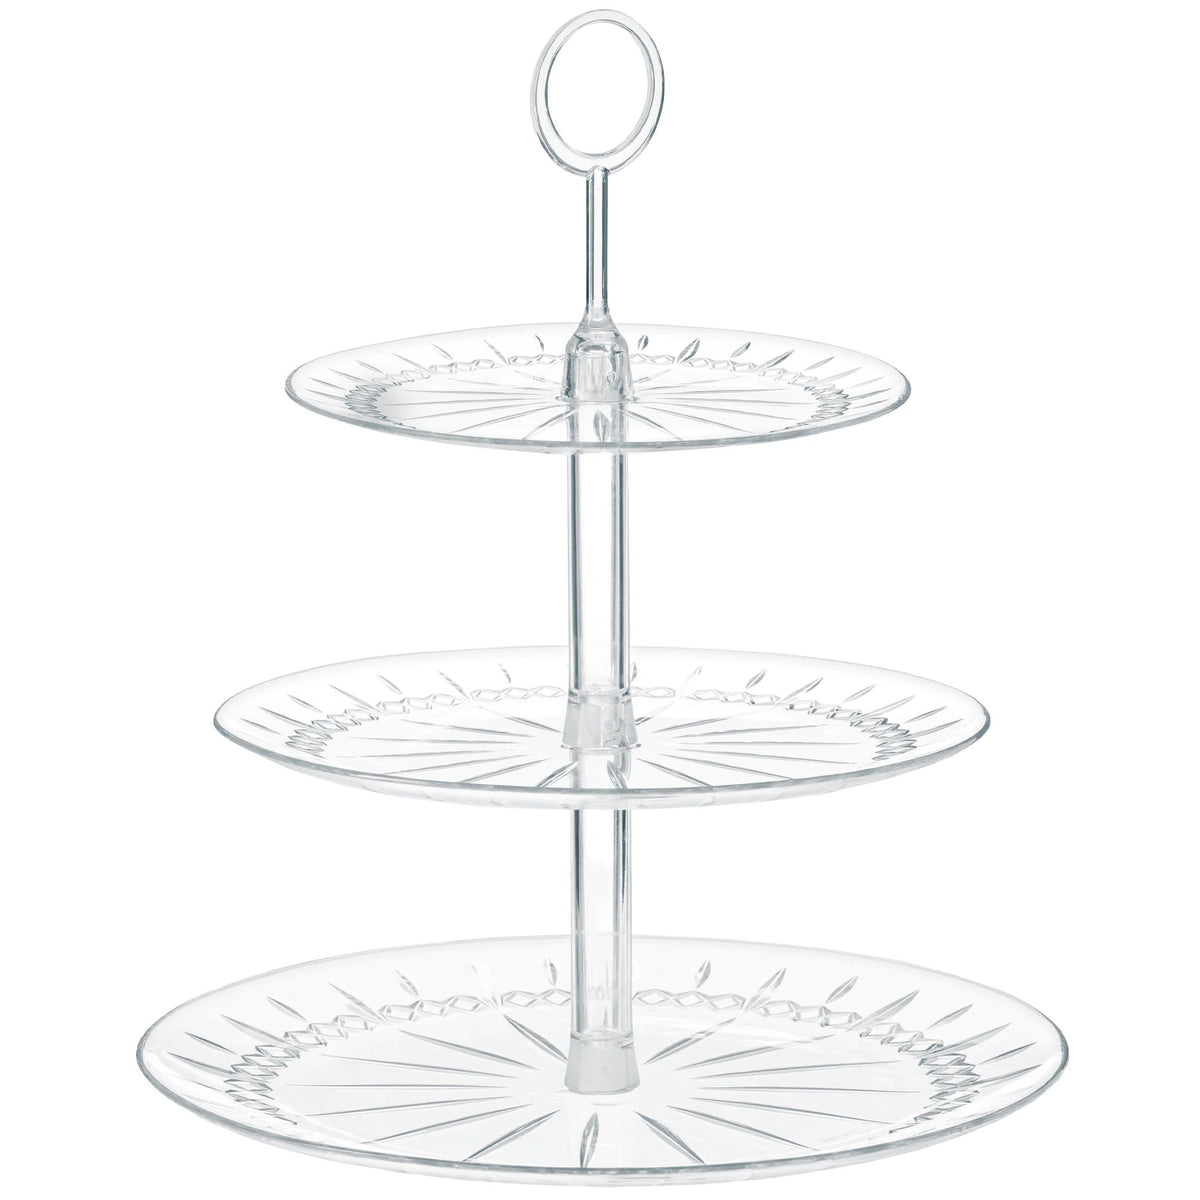 3 Tier Crystal Treat Stand Handle